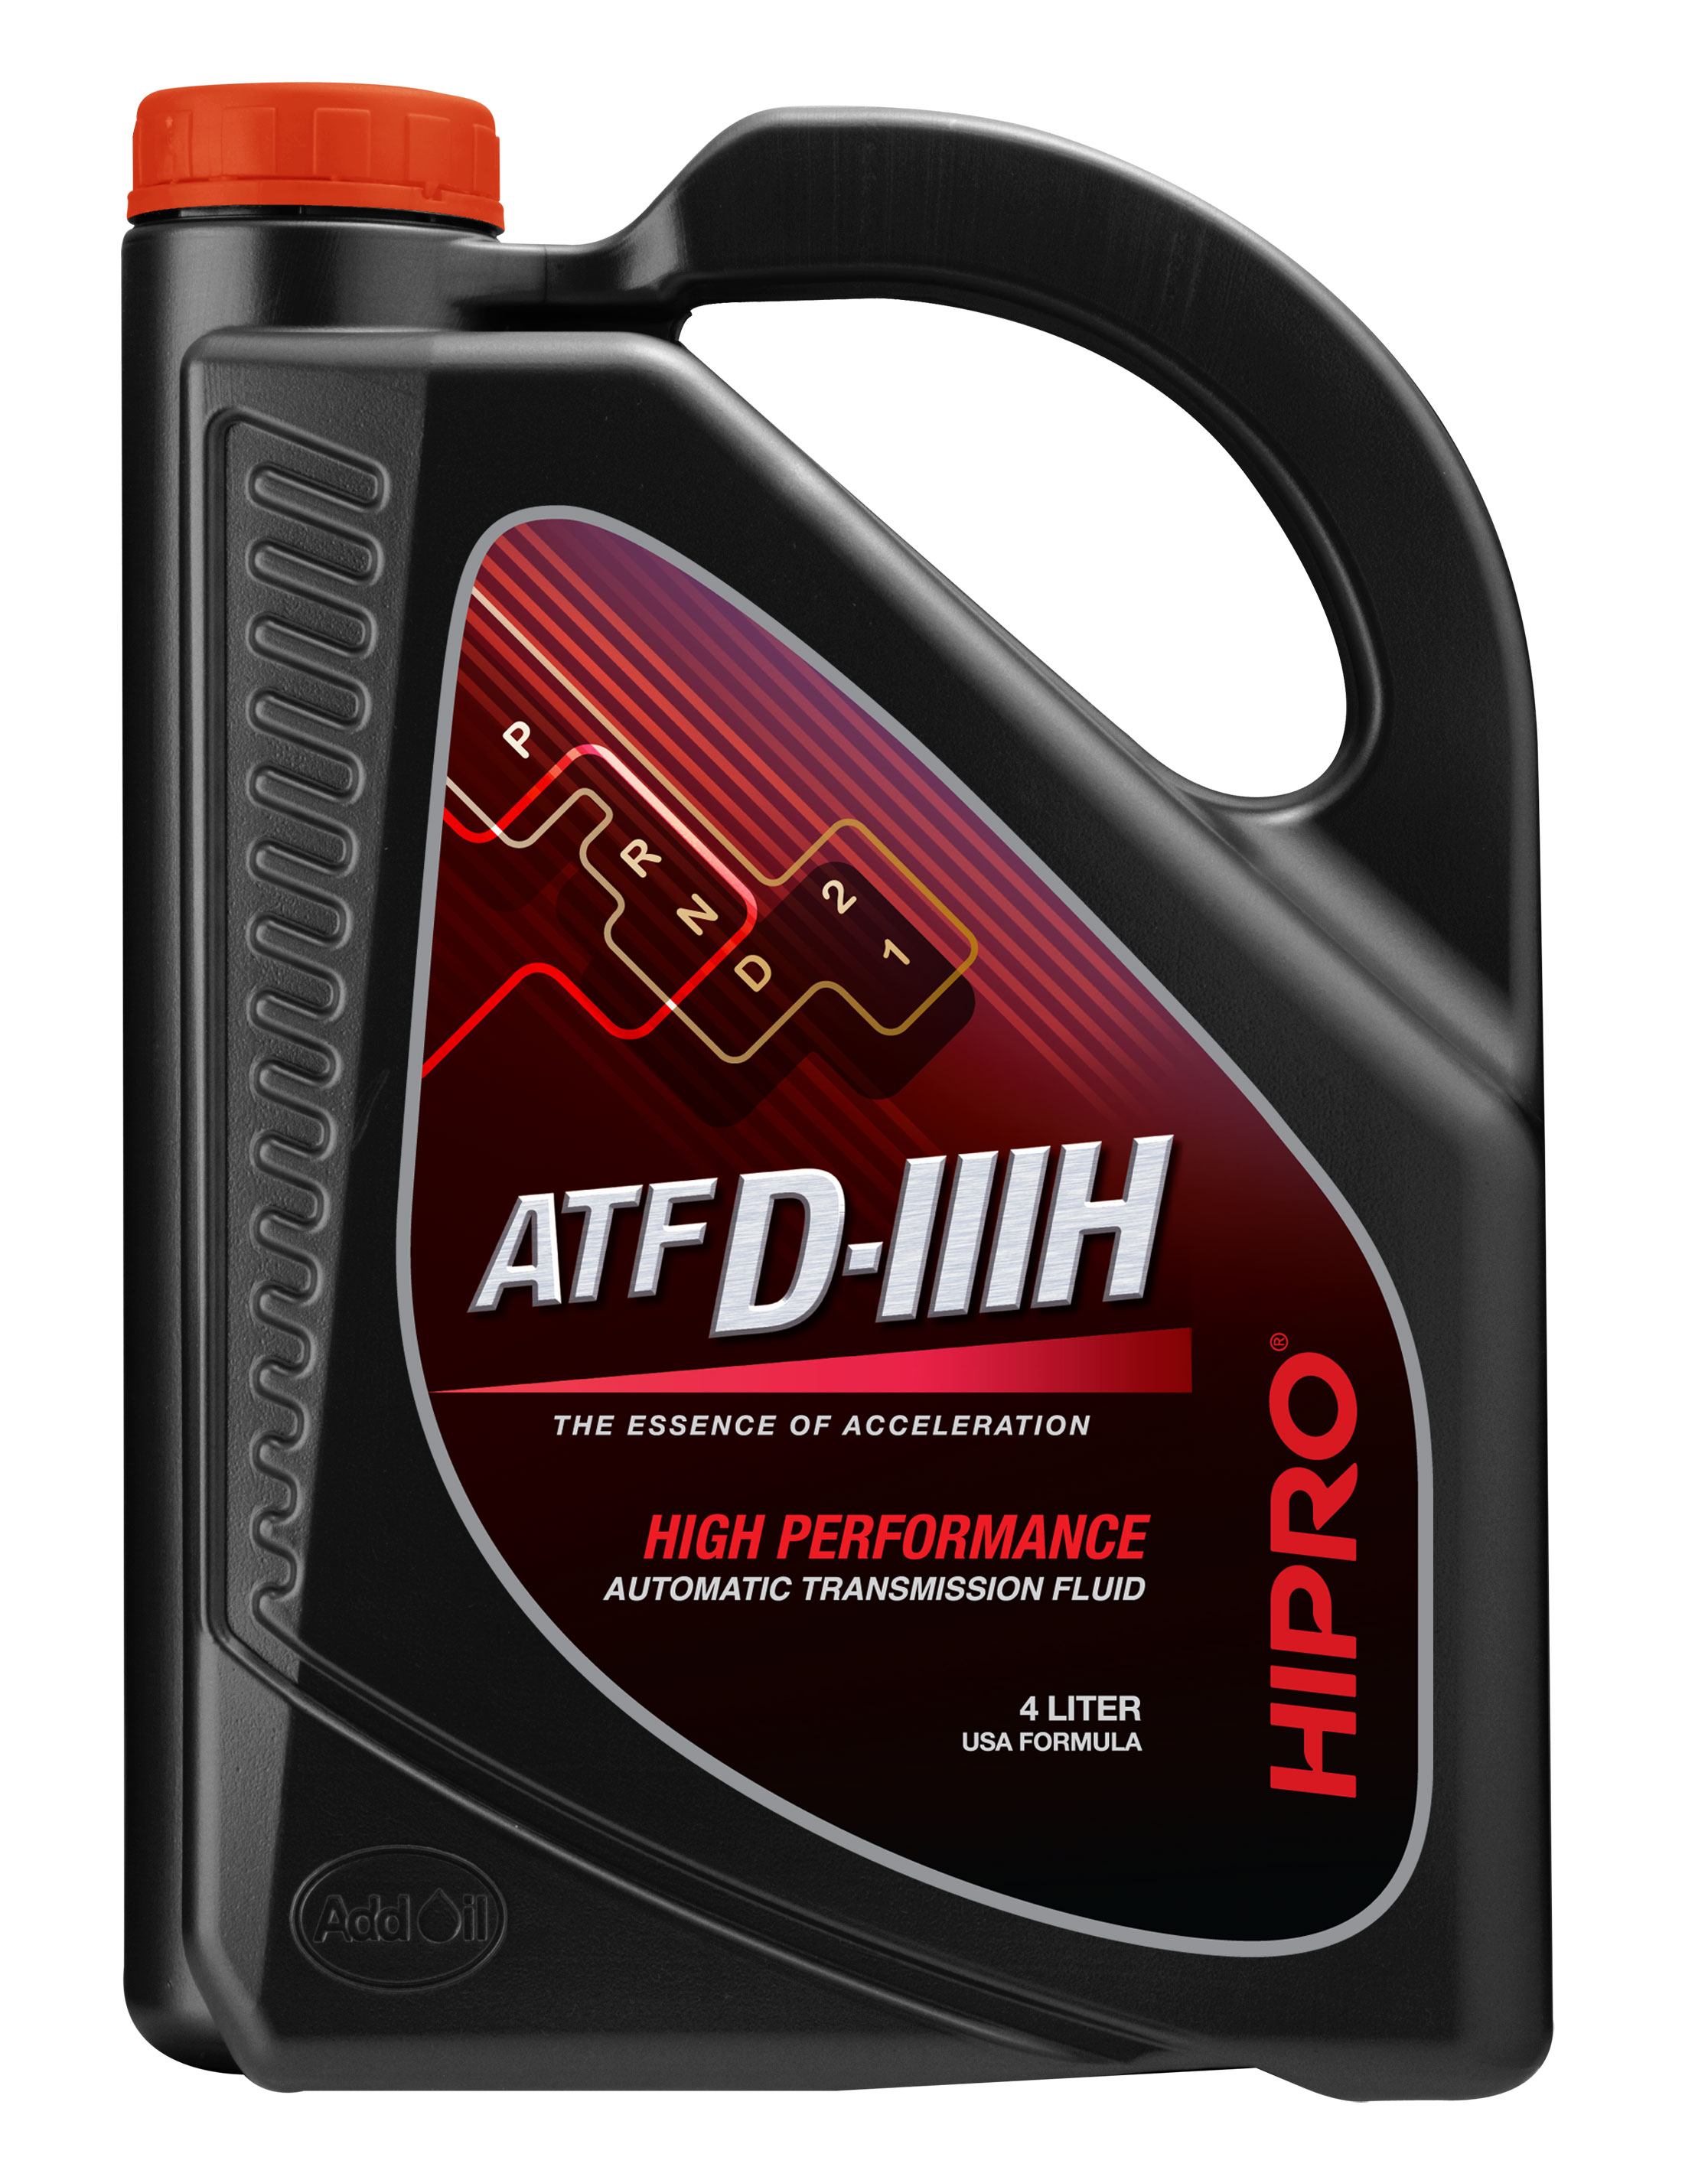 HIPRO ATF D-III H/M